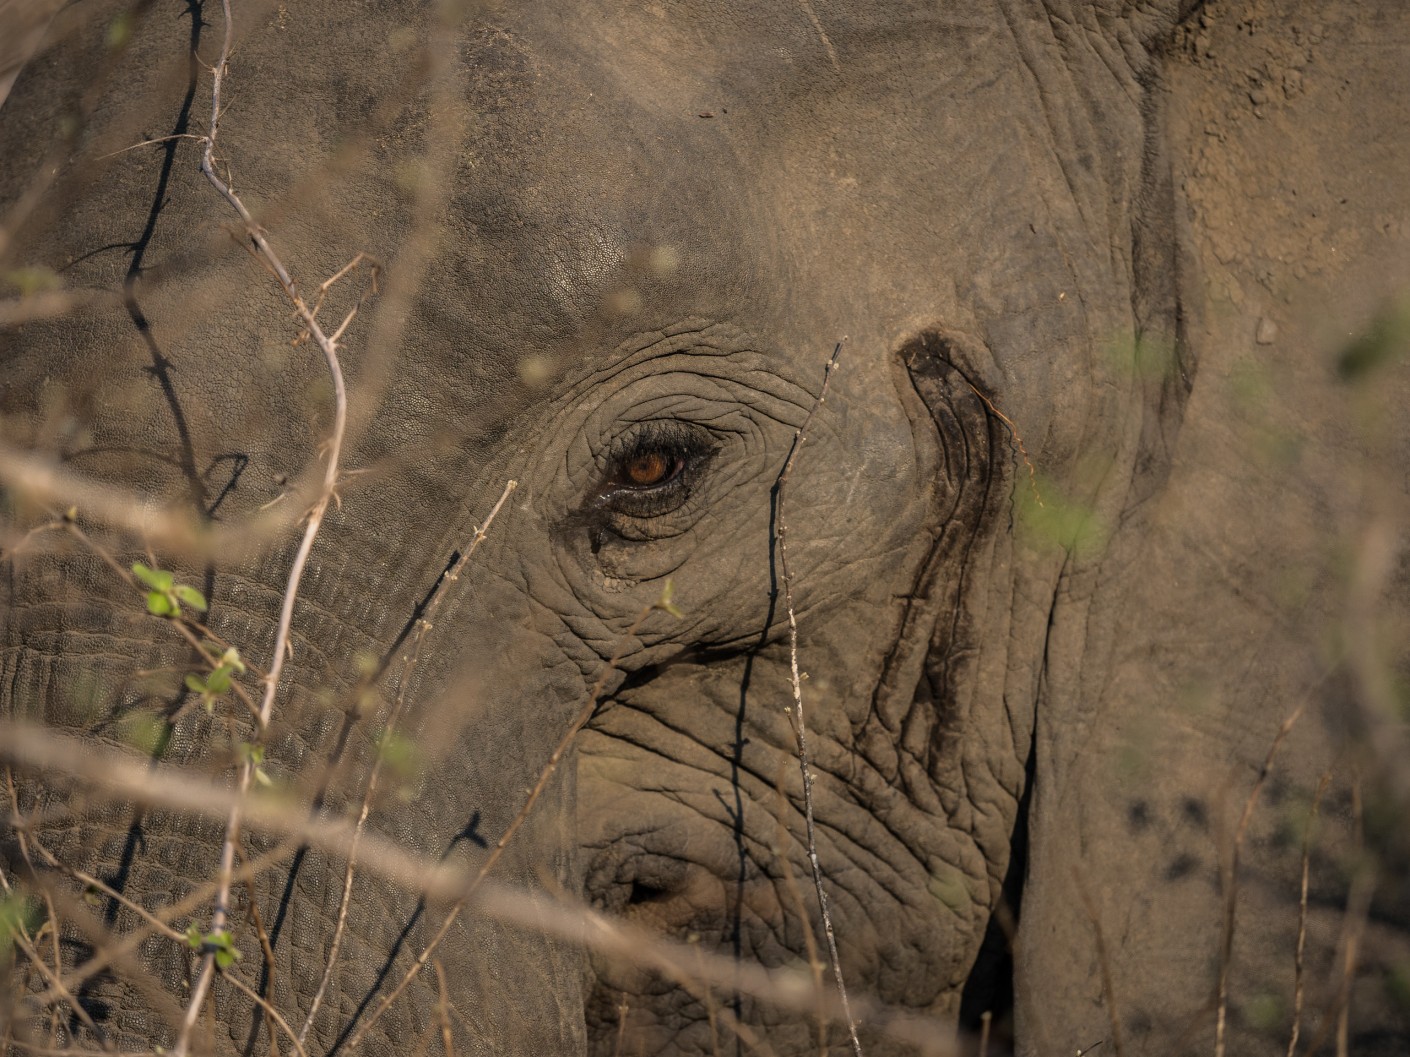 African Elephant in South Luangwa NP, Zambia.